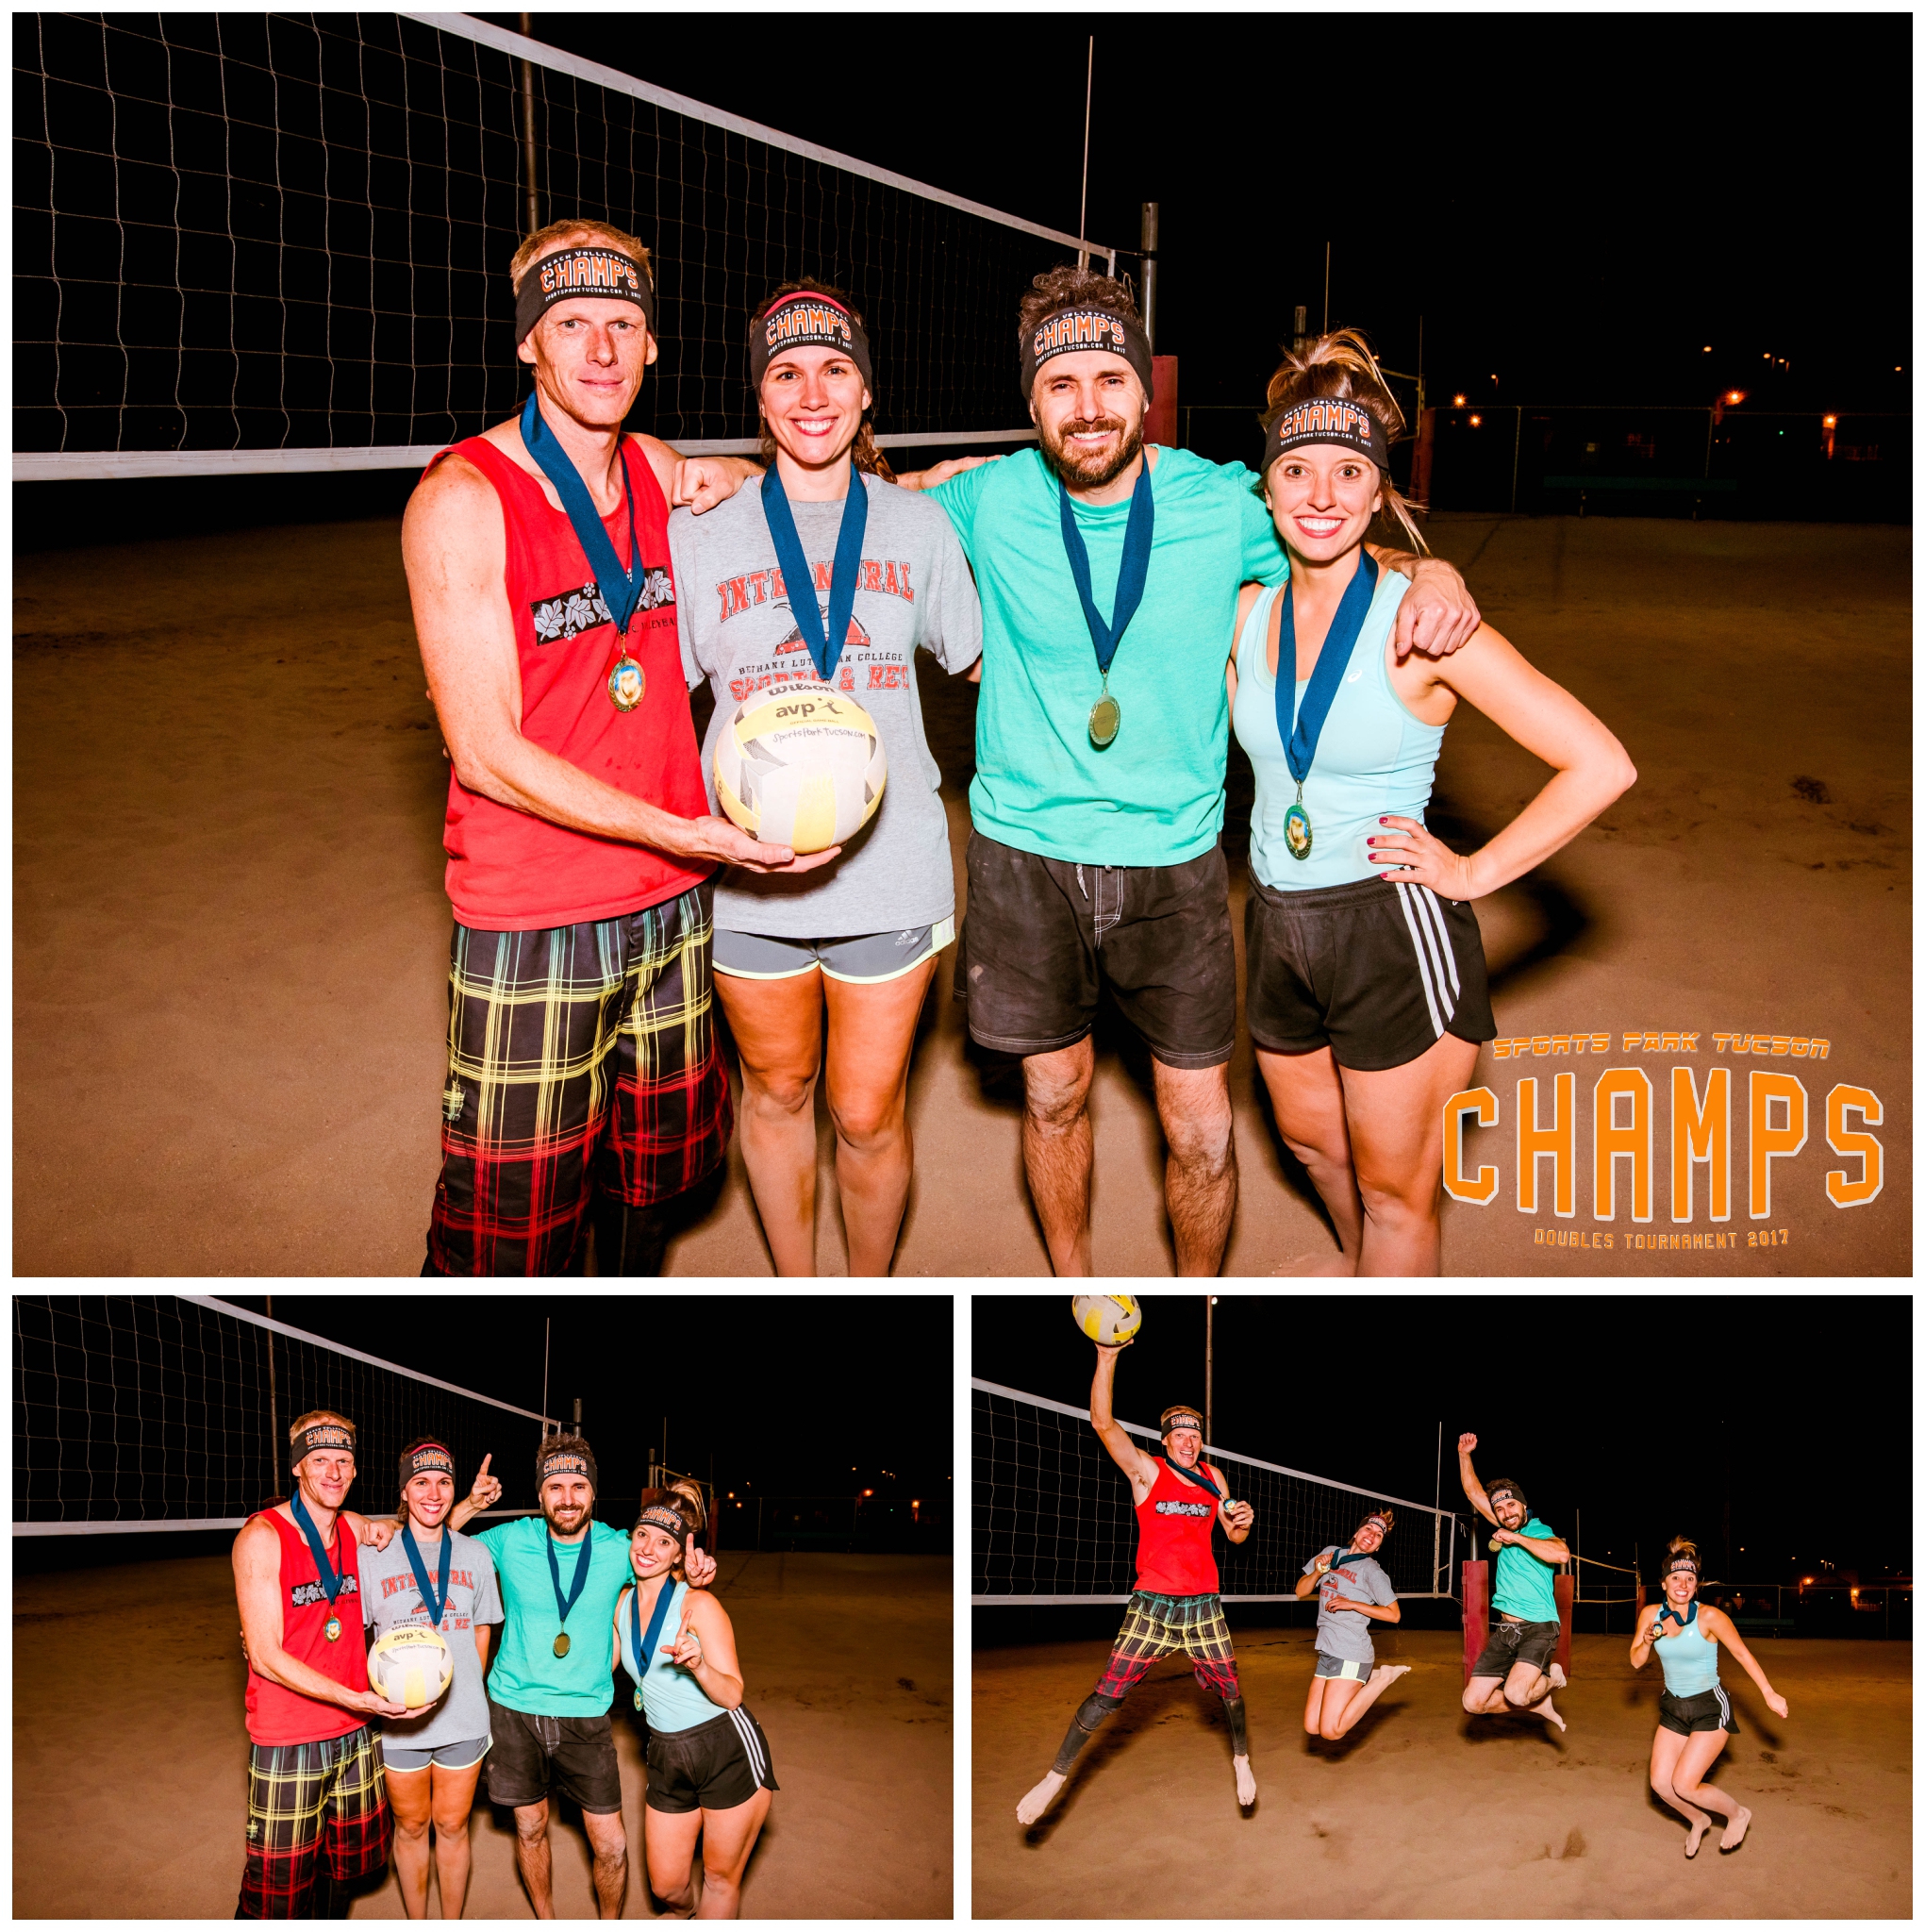 Volleyball Wed Co-ed 4 v 4 - Gold Champions